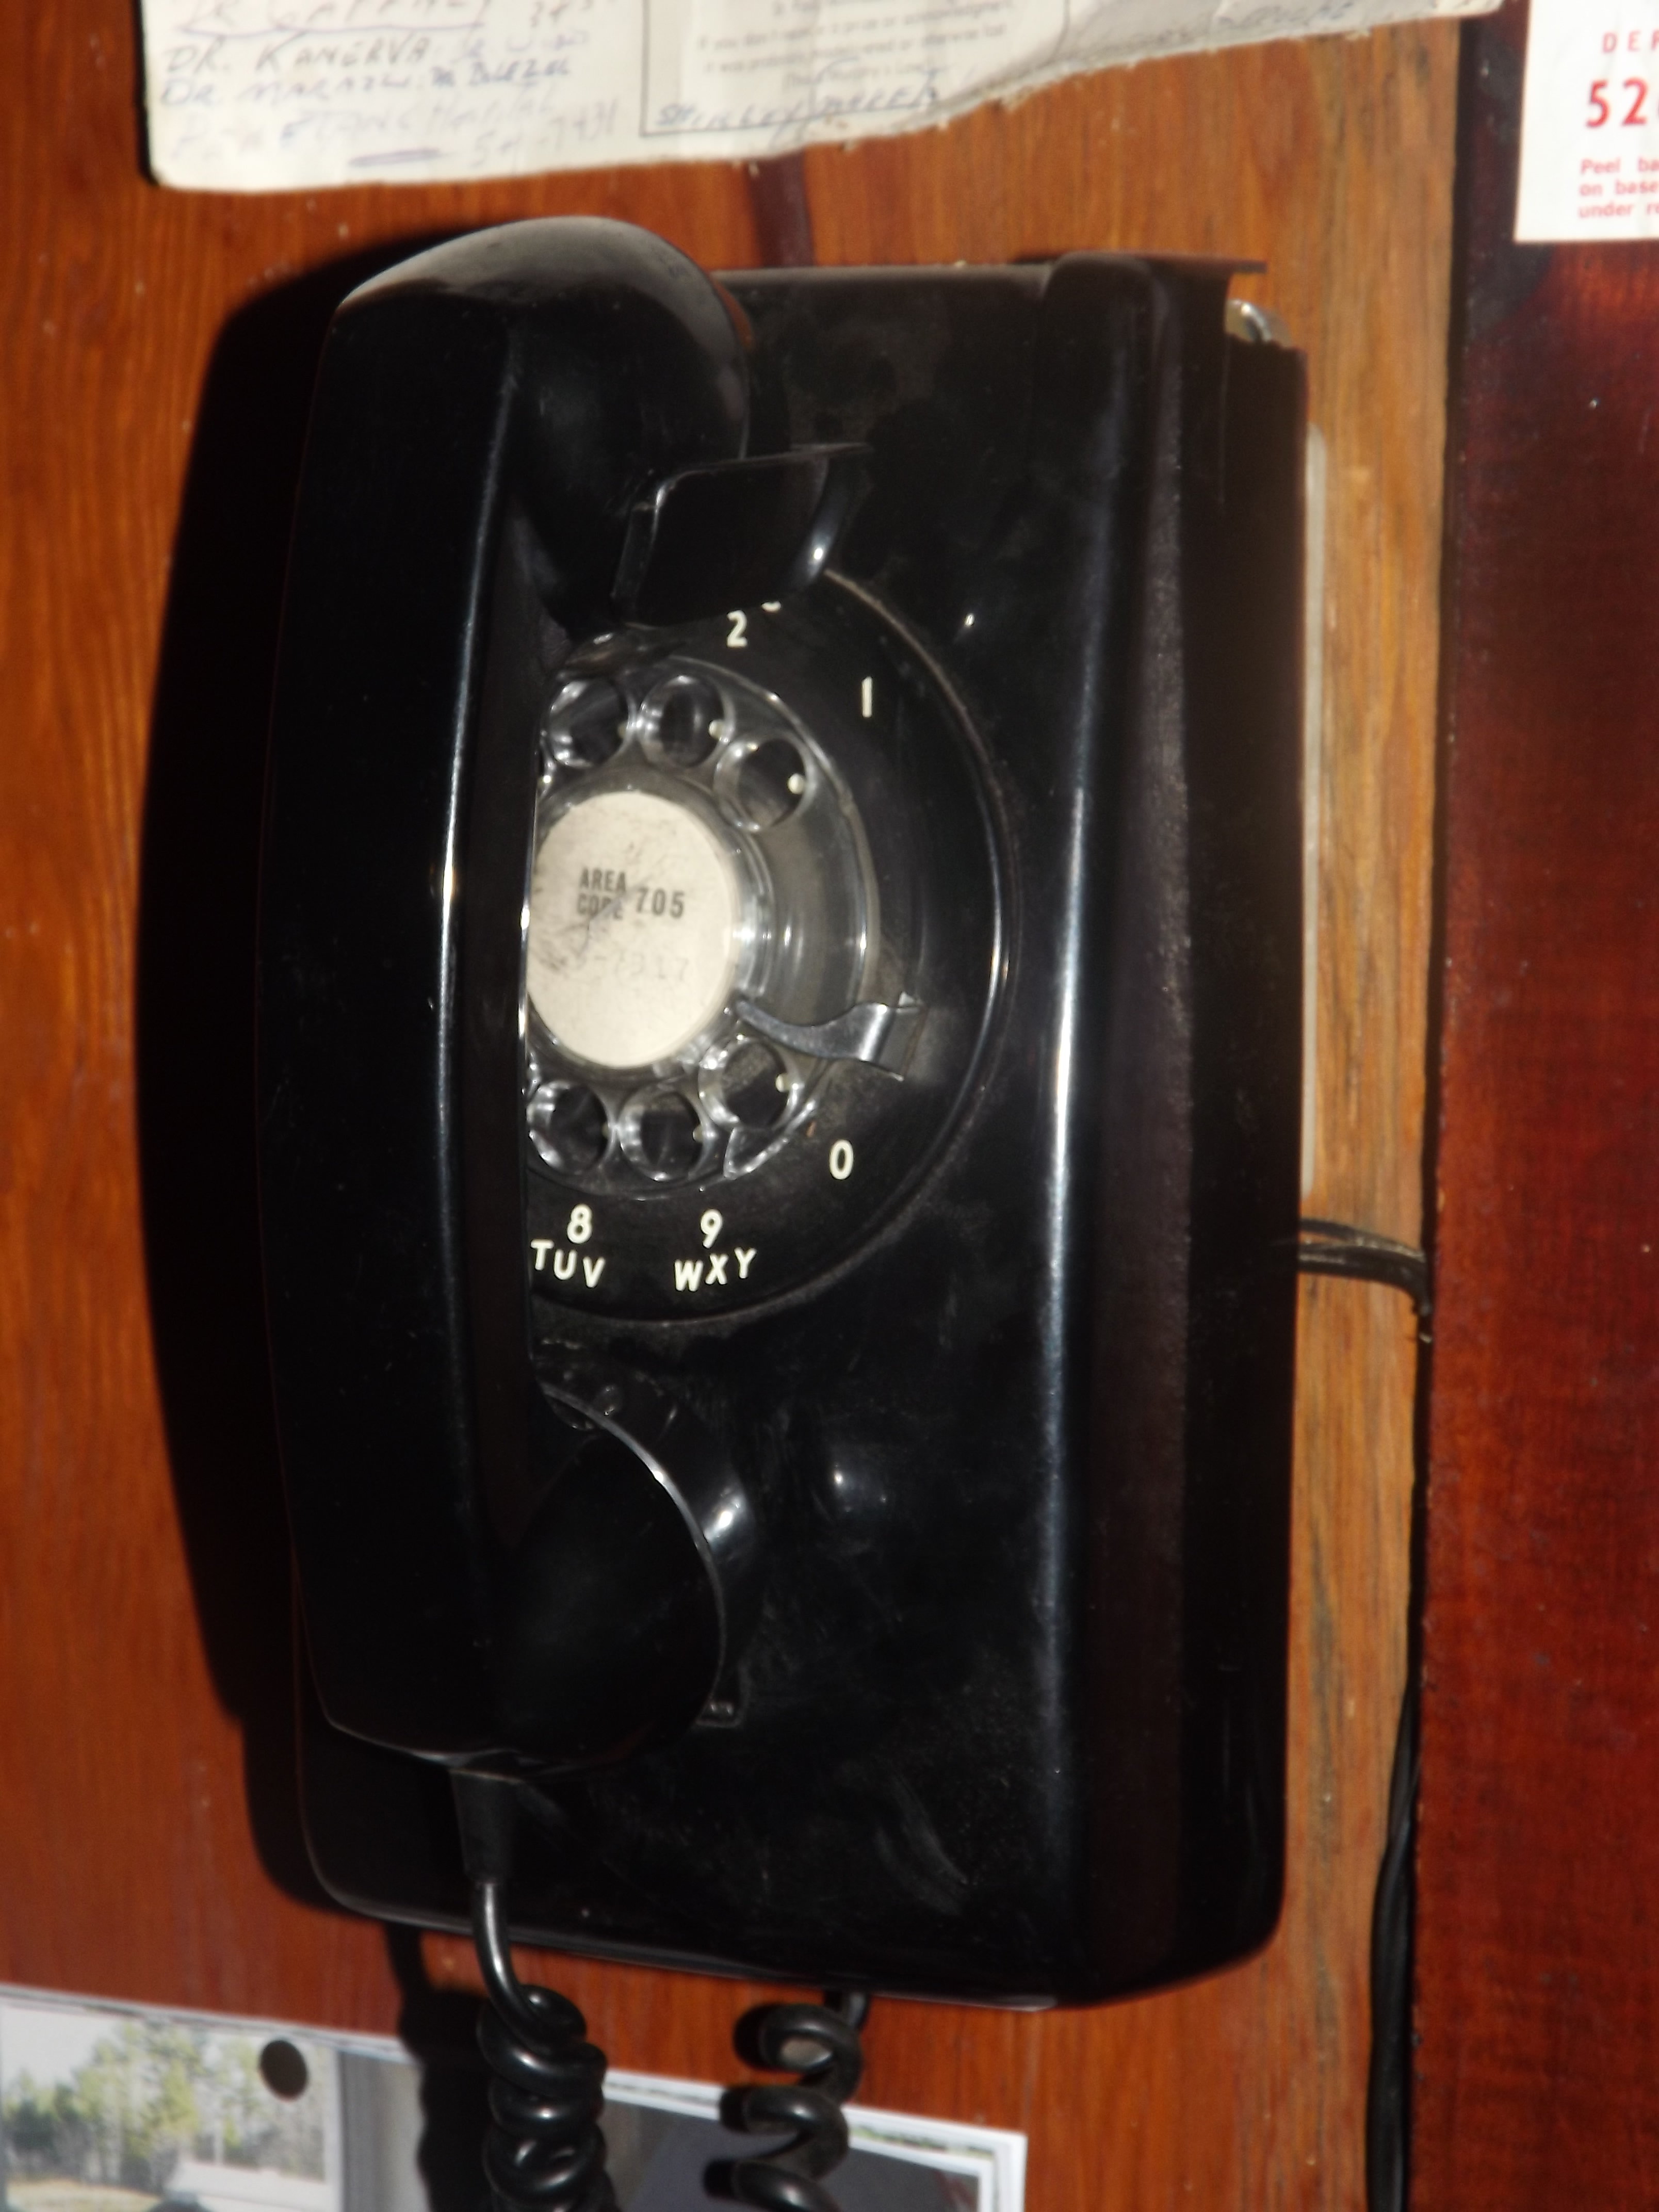 The old black rotary phone | Science and Story